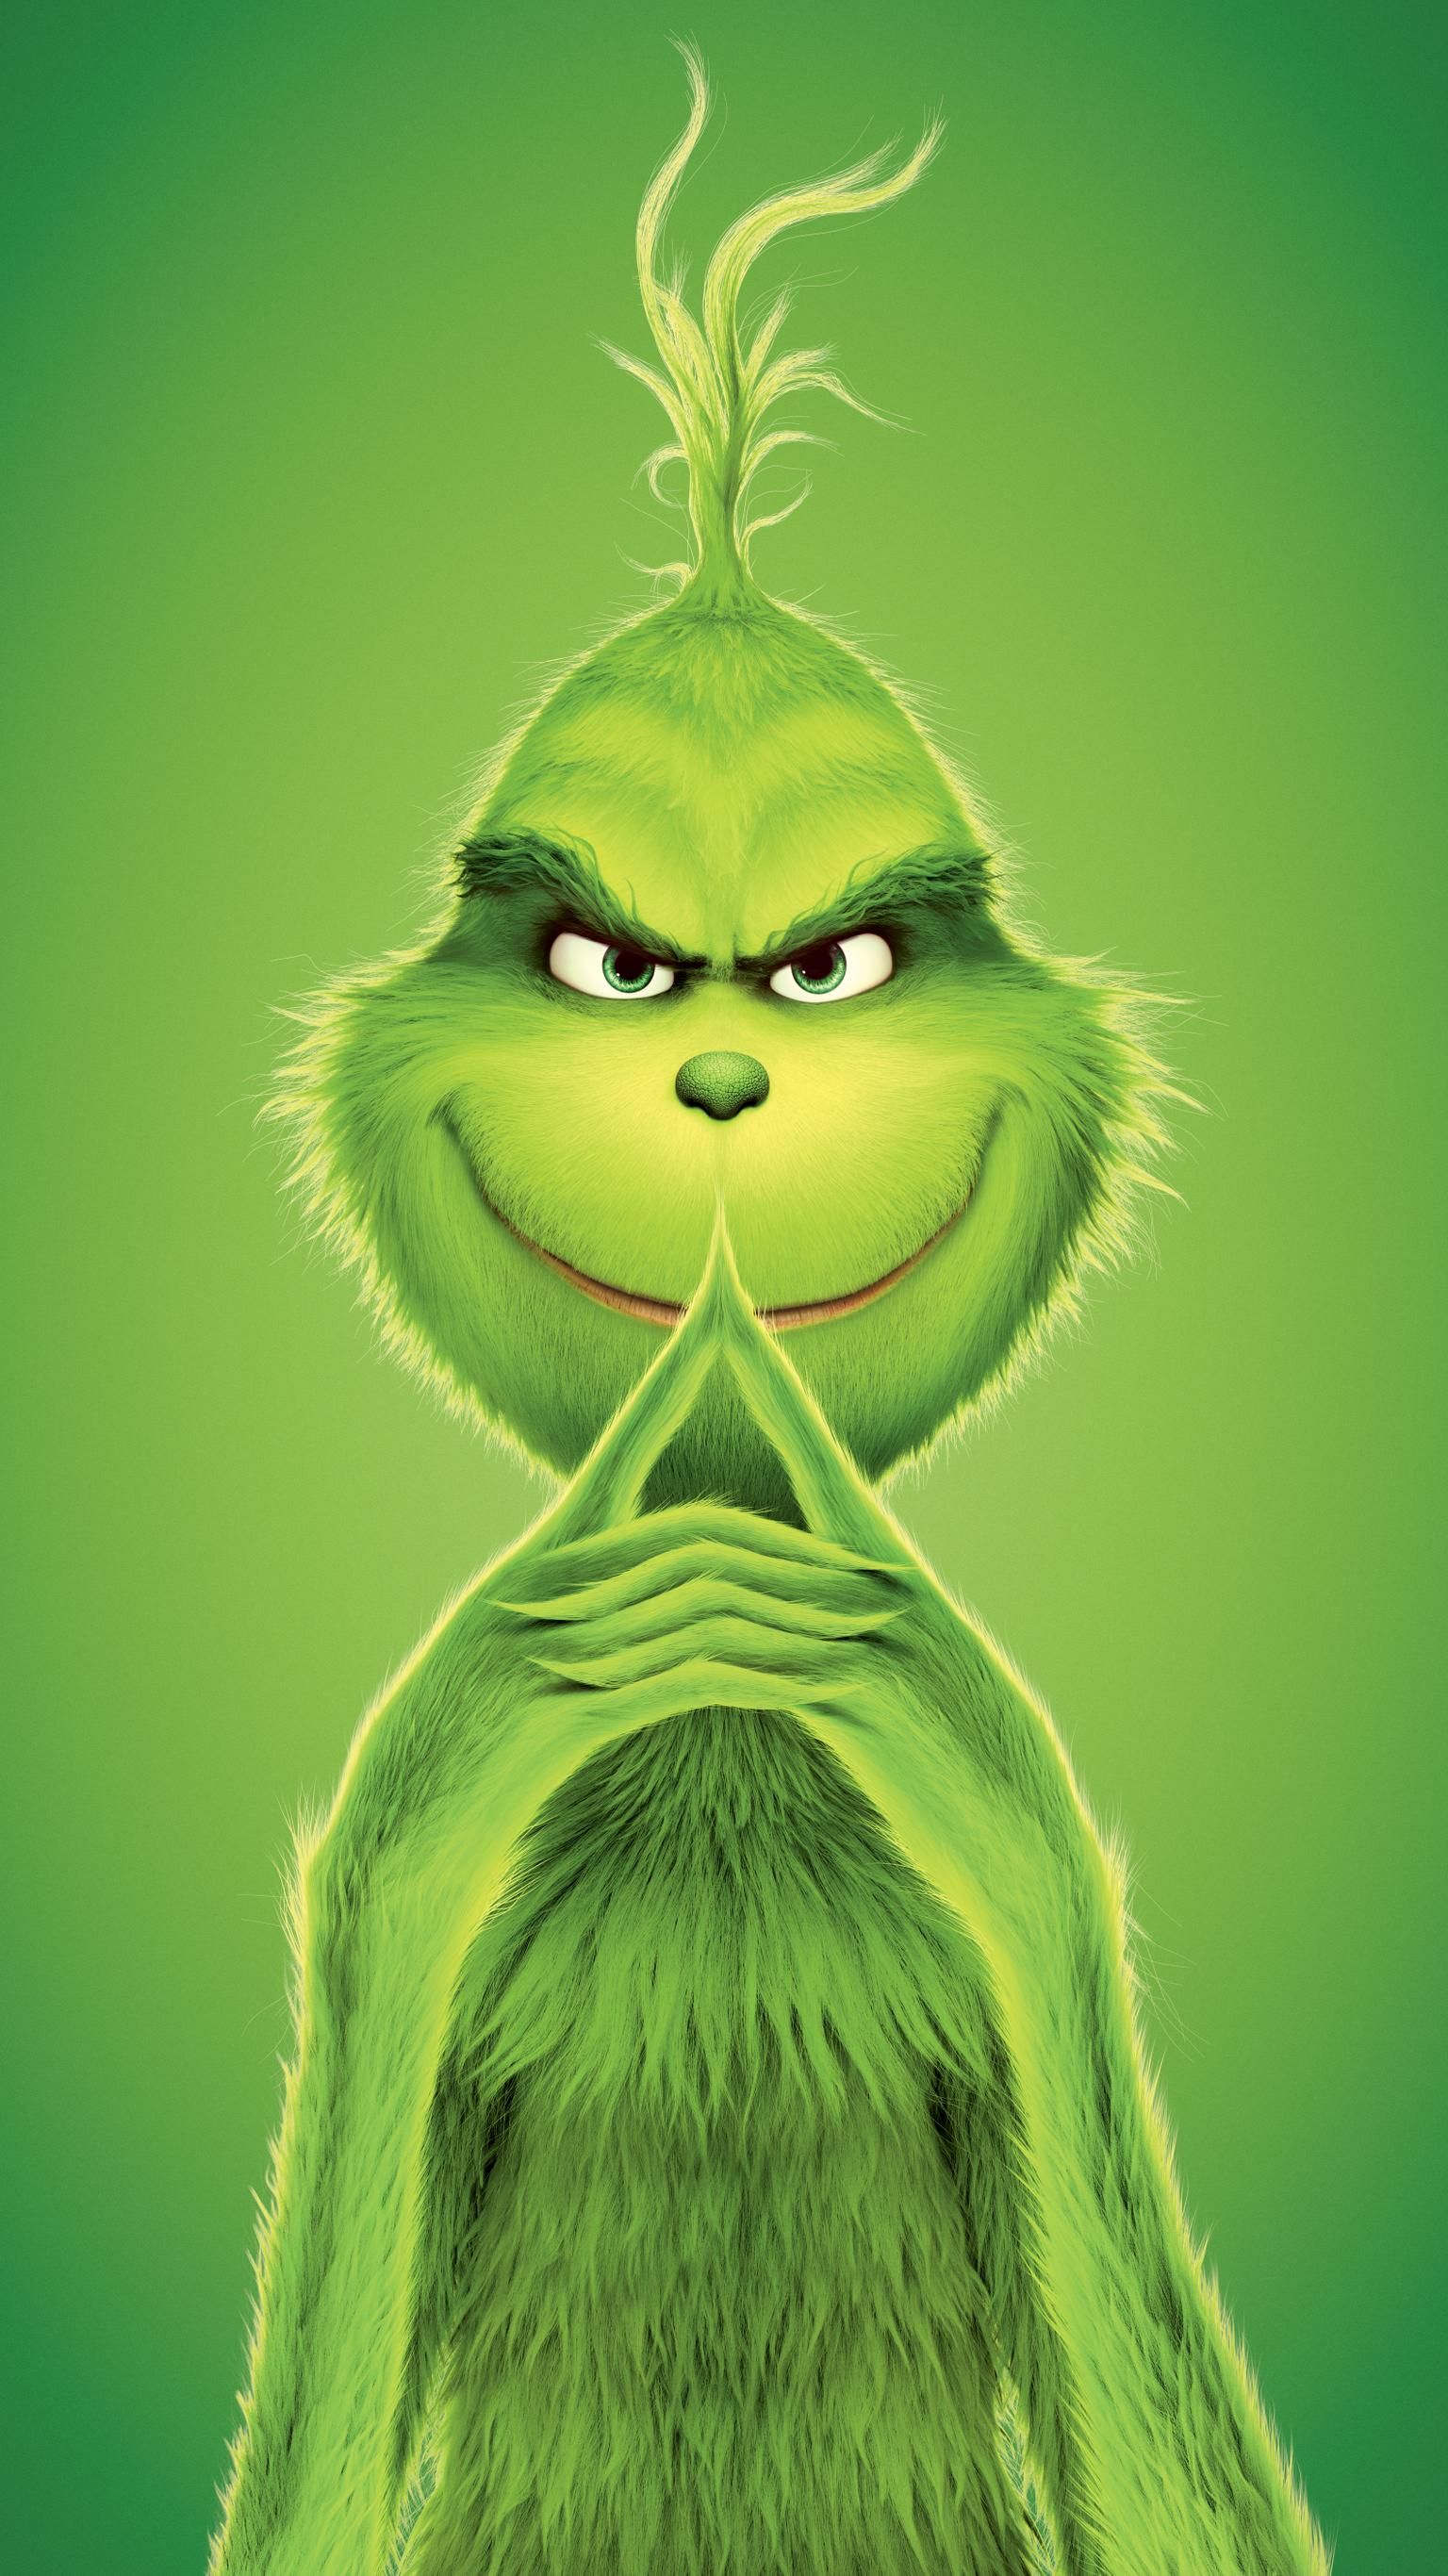 The Grinch 2018 Wallpapers